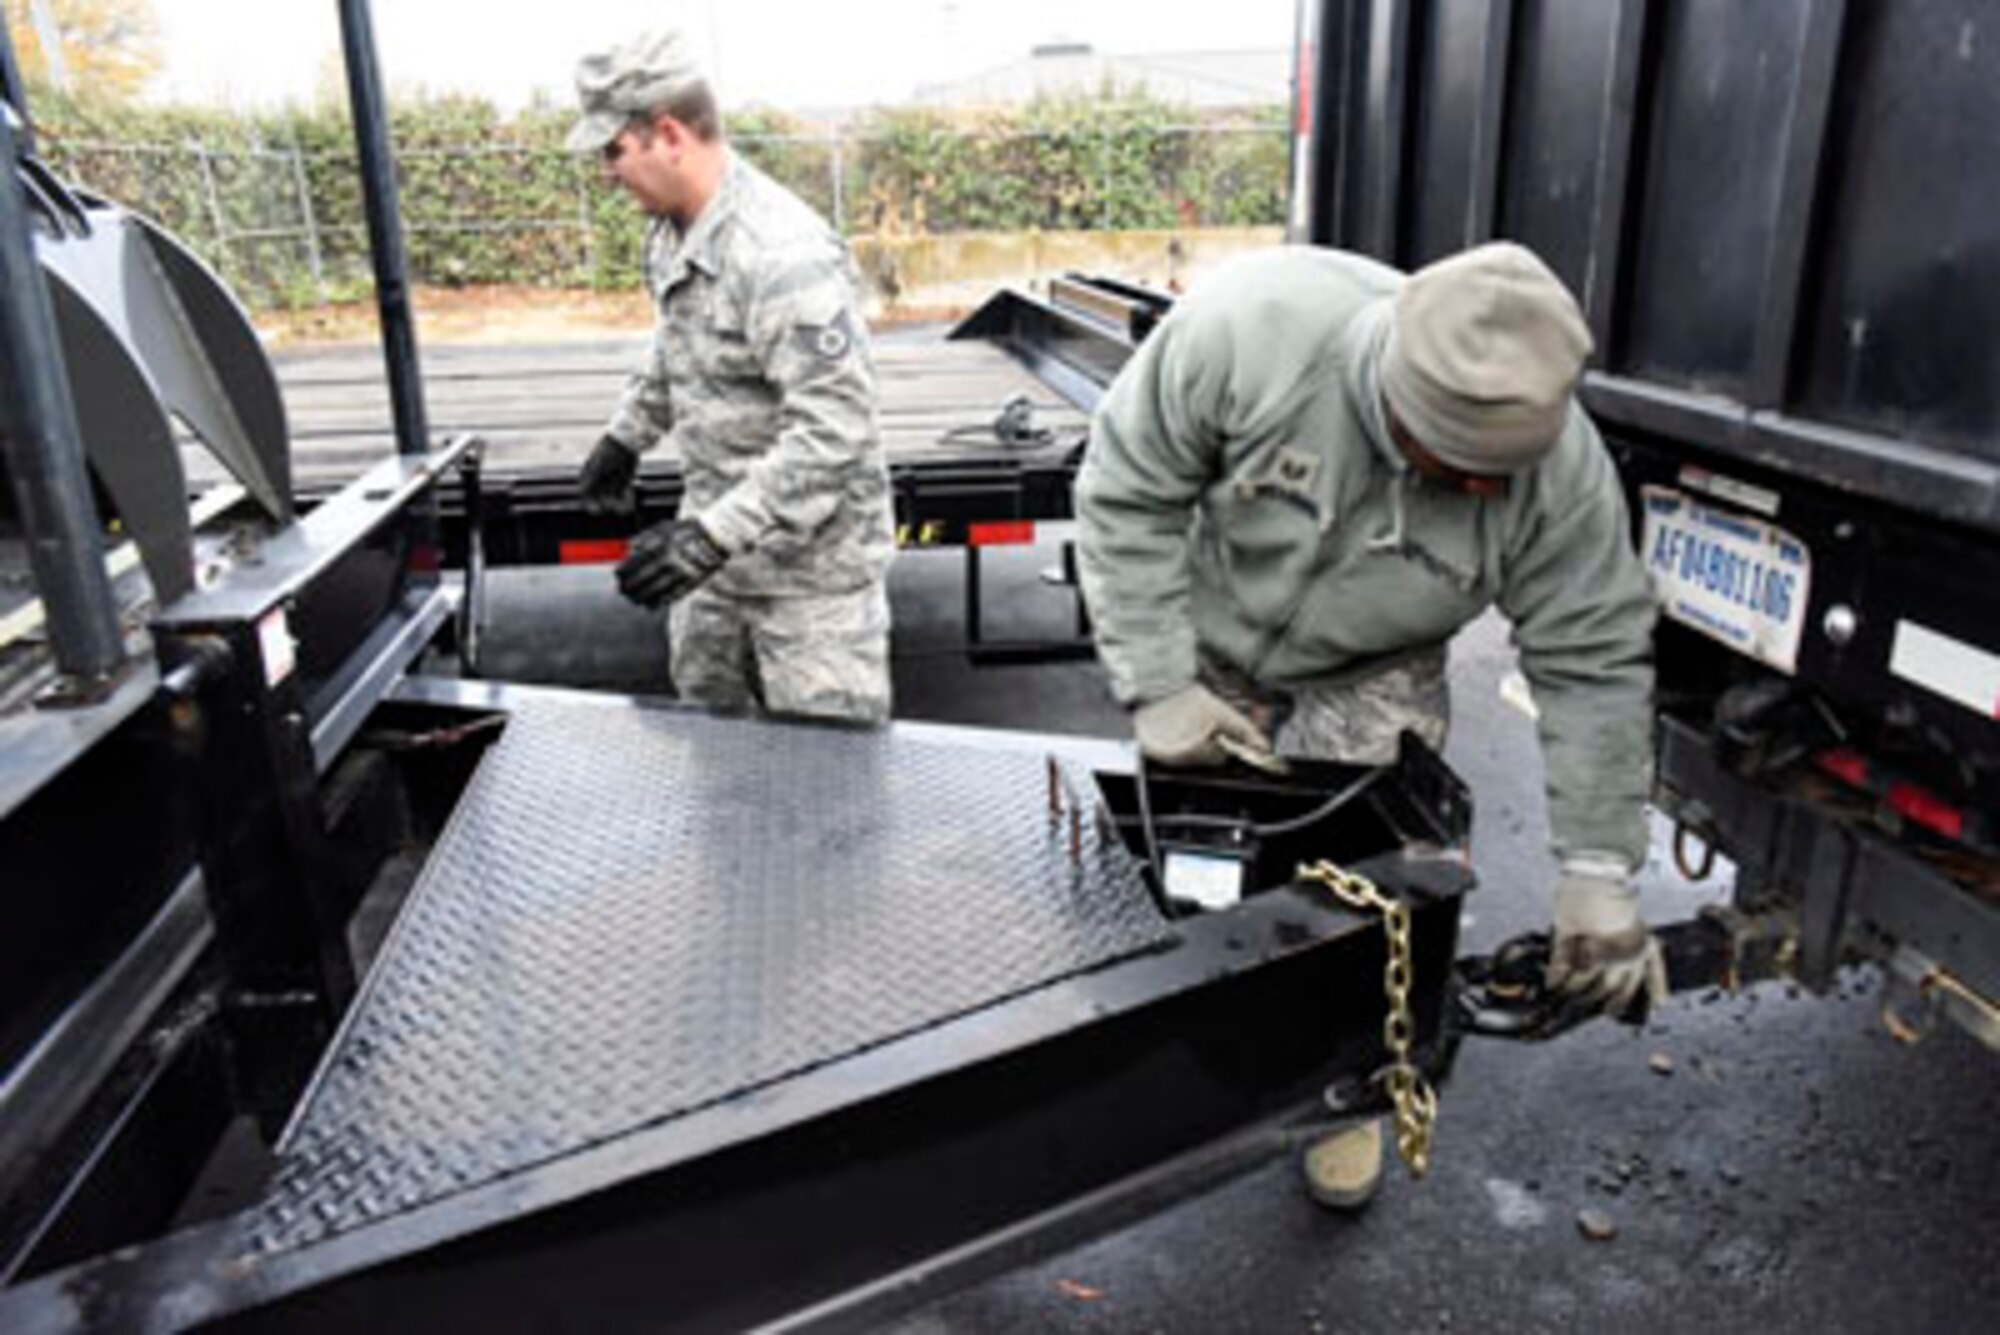 Staff Sgt. Bruce Booth, a 189th Logistics Readiness Squadron vehicle maintenance mechanic and Tech. Sgt. Patrick Williams, a 189th LRS cargo specialist, hook a trailer to a truck in order to pull a transportation platform out during a Rapid Augmentation Team equipment load drill Nov. 29, 2016, at Little Rock Air Force Base, Ark. The team loaded heavy equipment and small vehicles on to the platform to practice readiness in the event of a state emergency. (U.S. Air National Guard photo by Tech. Sgt. Jessica Condit)